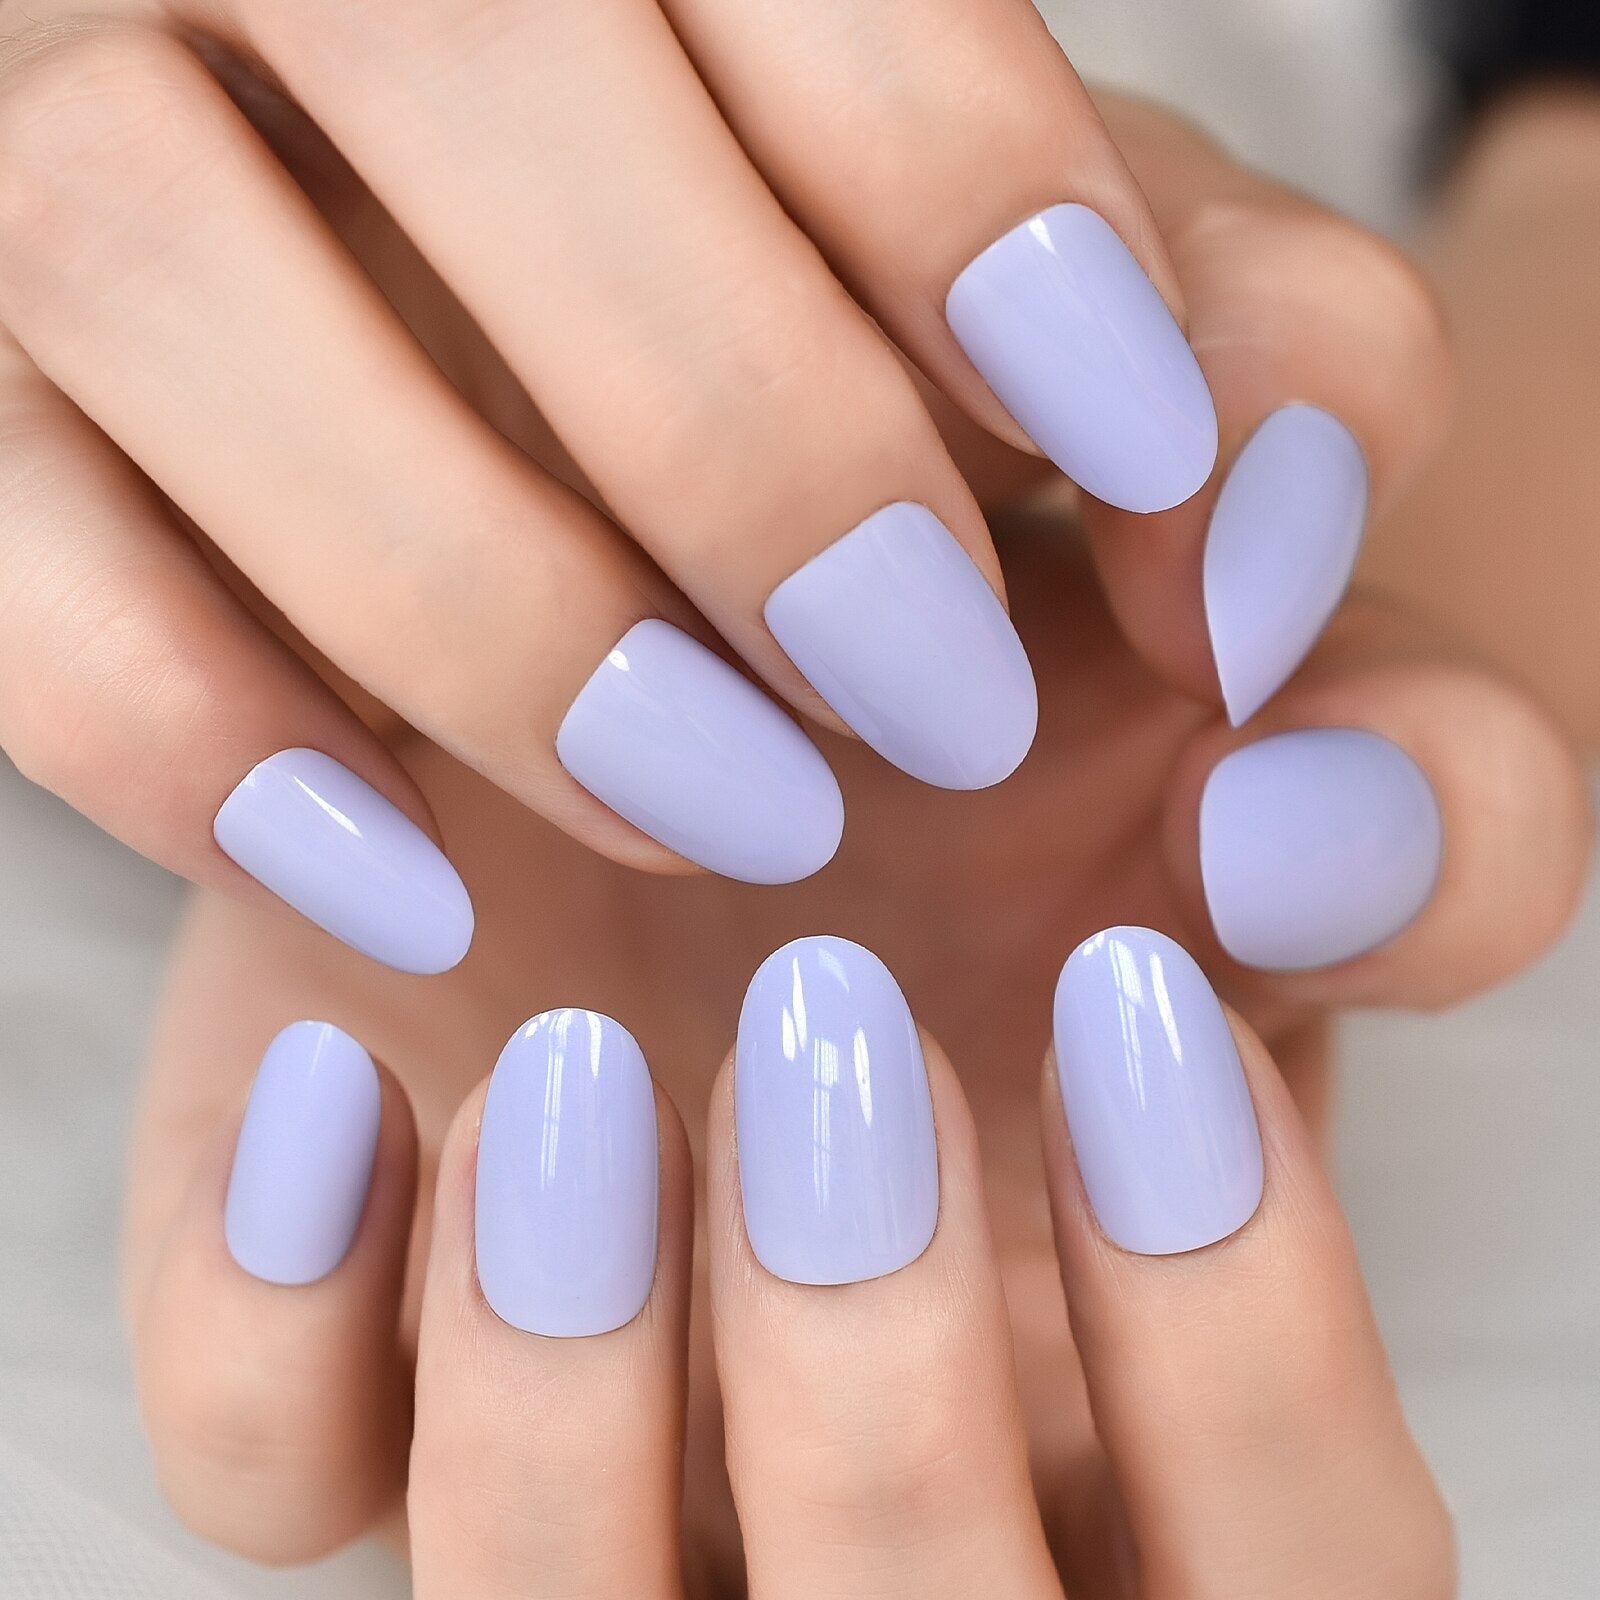 Radiant Reusable Medium Oval False Nails in Glossy Light Purple - Elevate Your Manicure Game